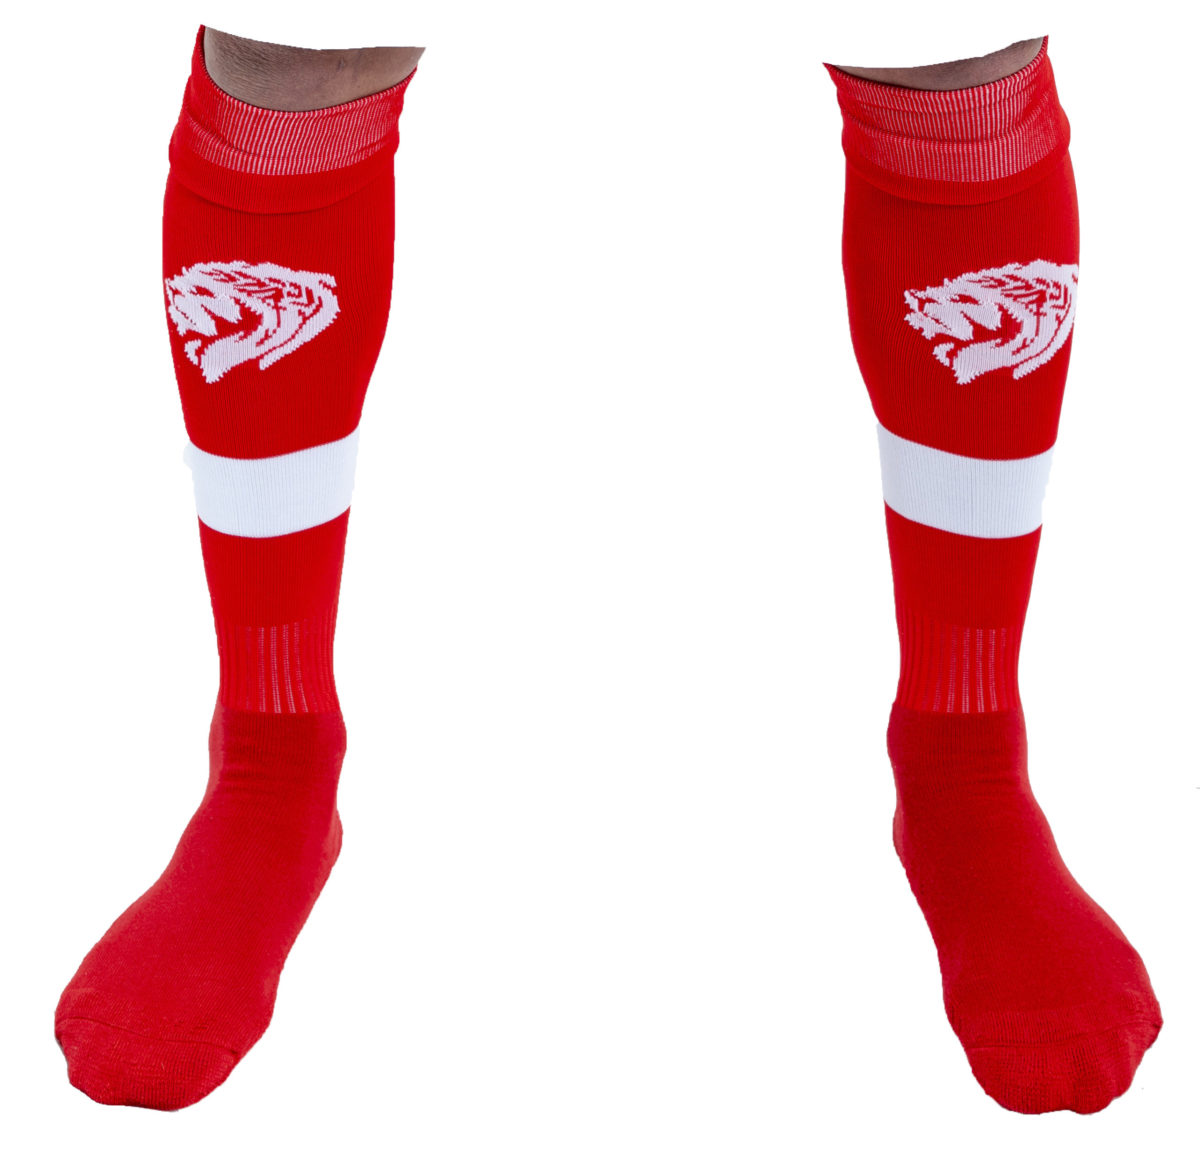 Chaussettes Aestas rouges/blanches